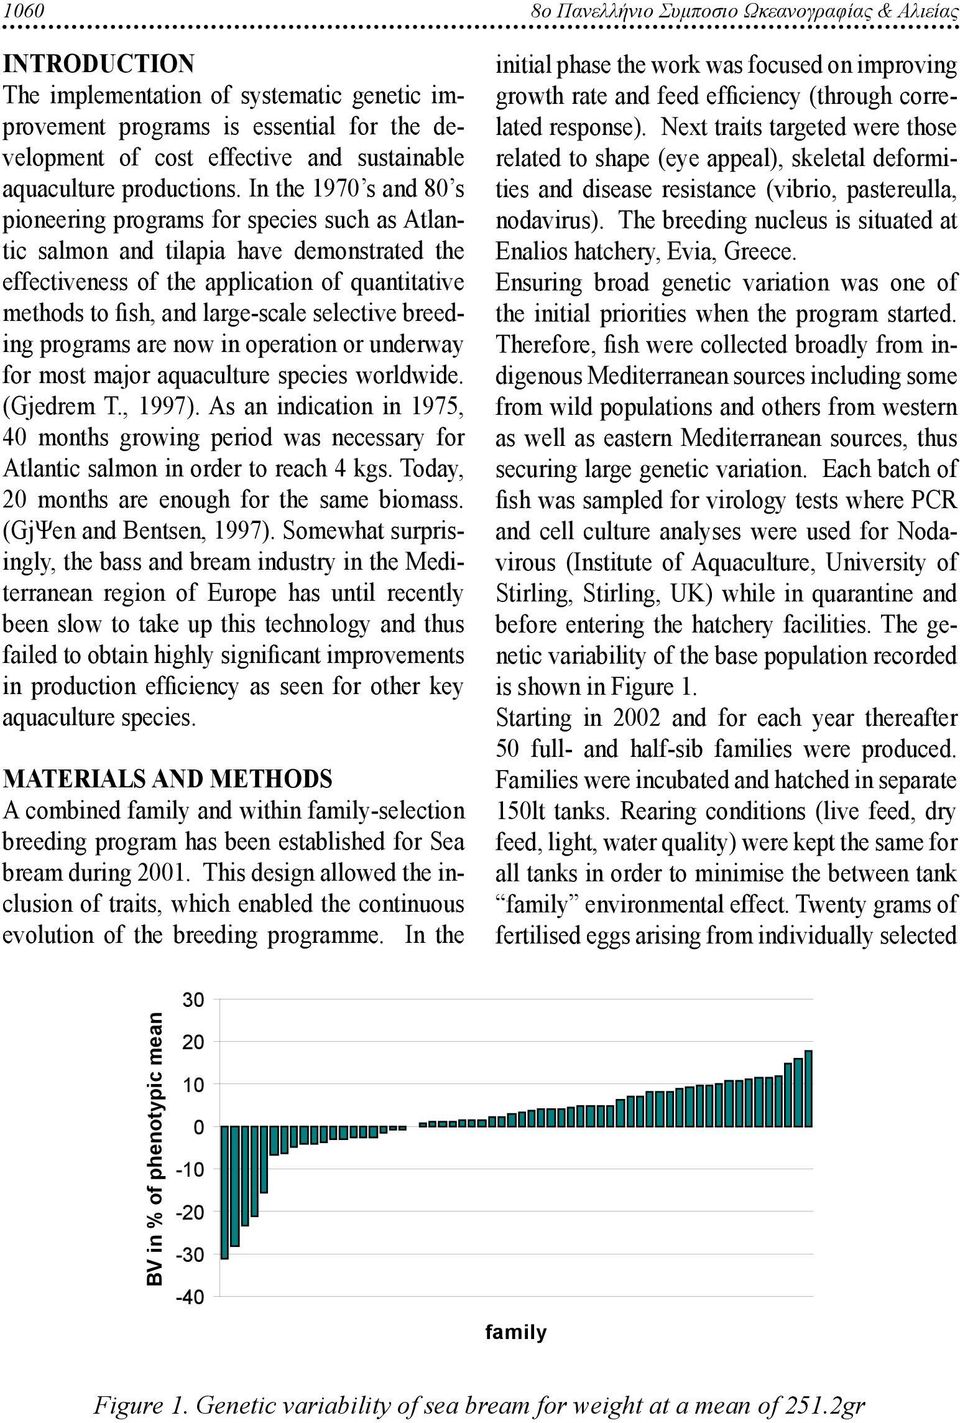 In the 1970 s and 80 s pioneering programs for species such as Atlantic salmon and tilapia have demonstrated the effectiveness of the application of quantitative methods to fish, and large-scale